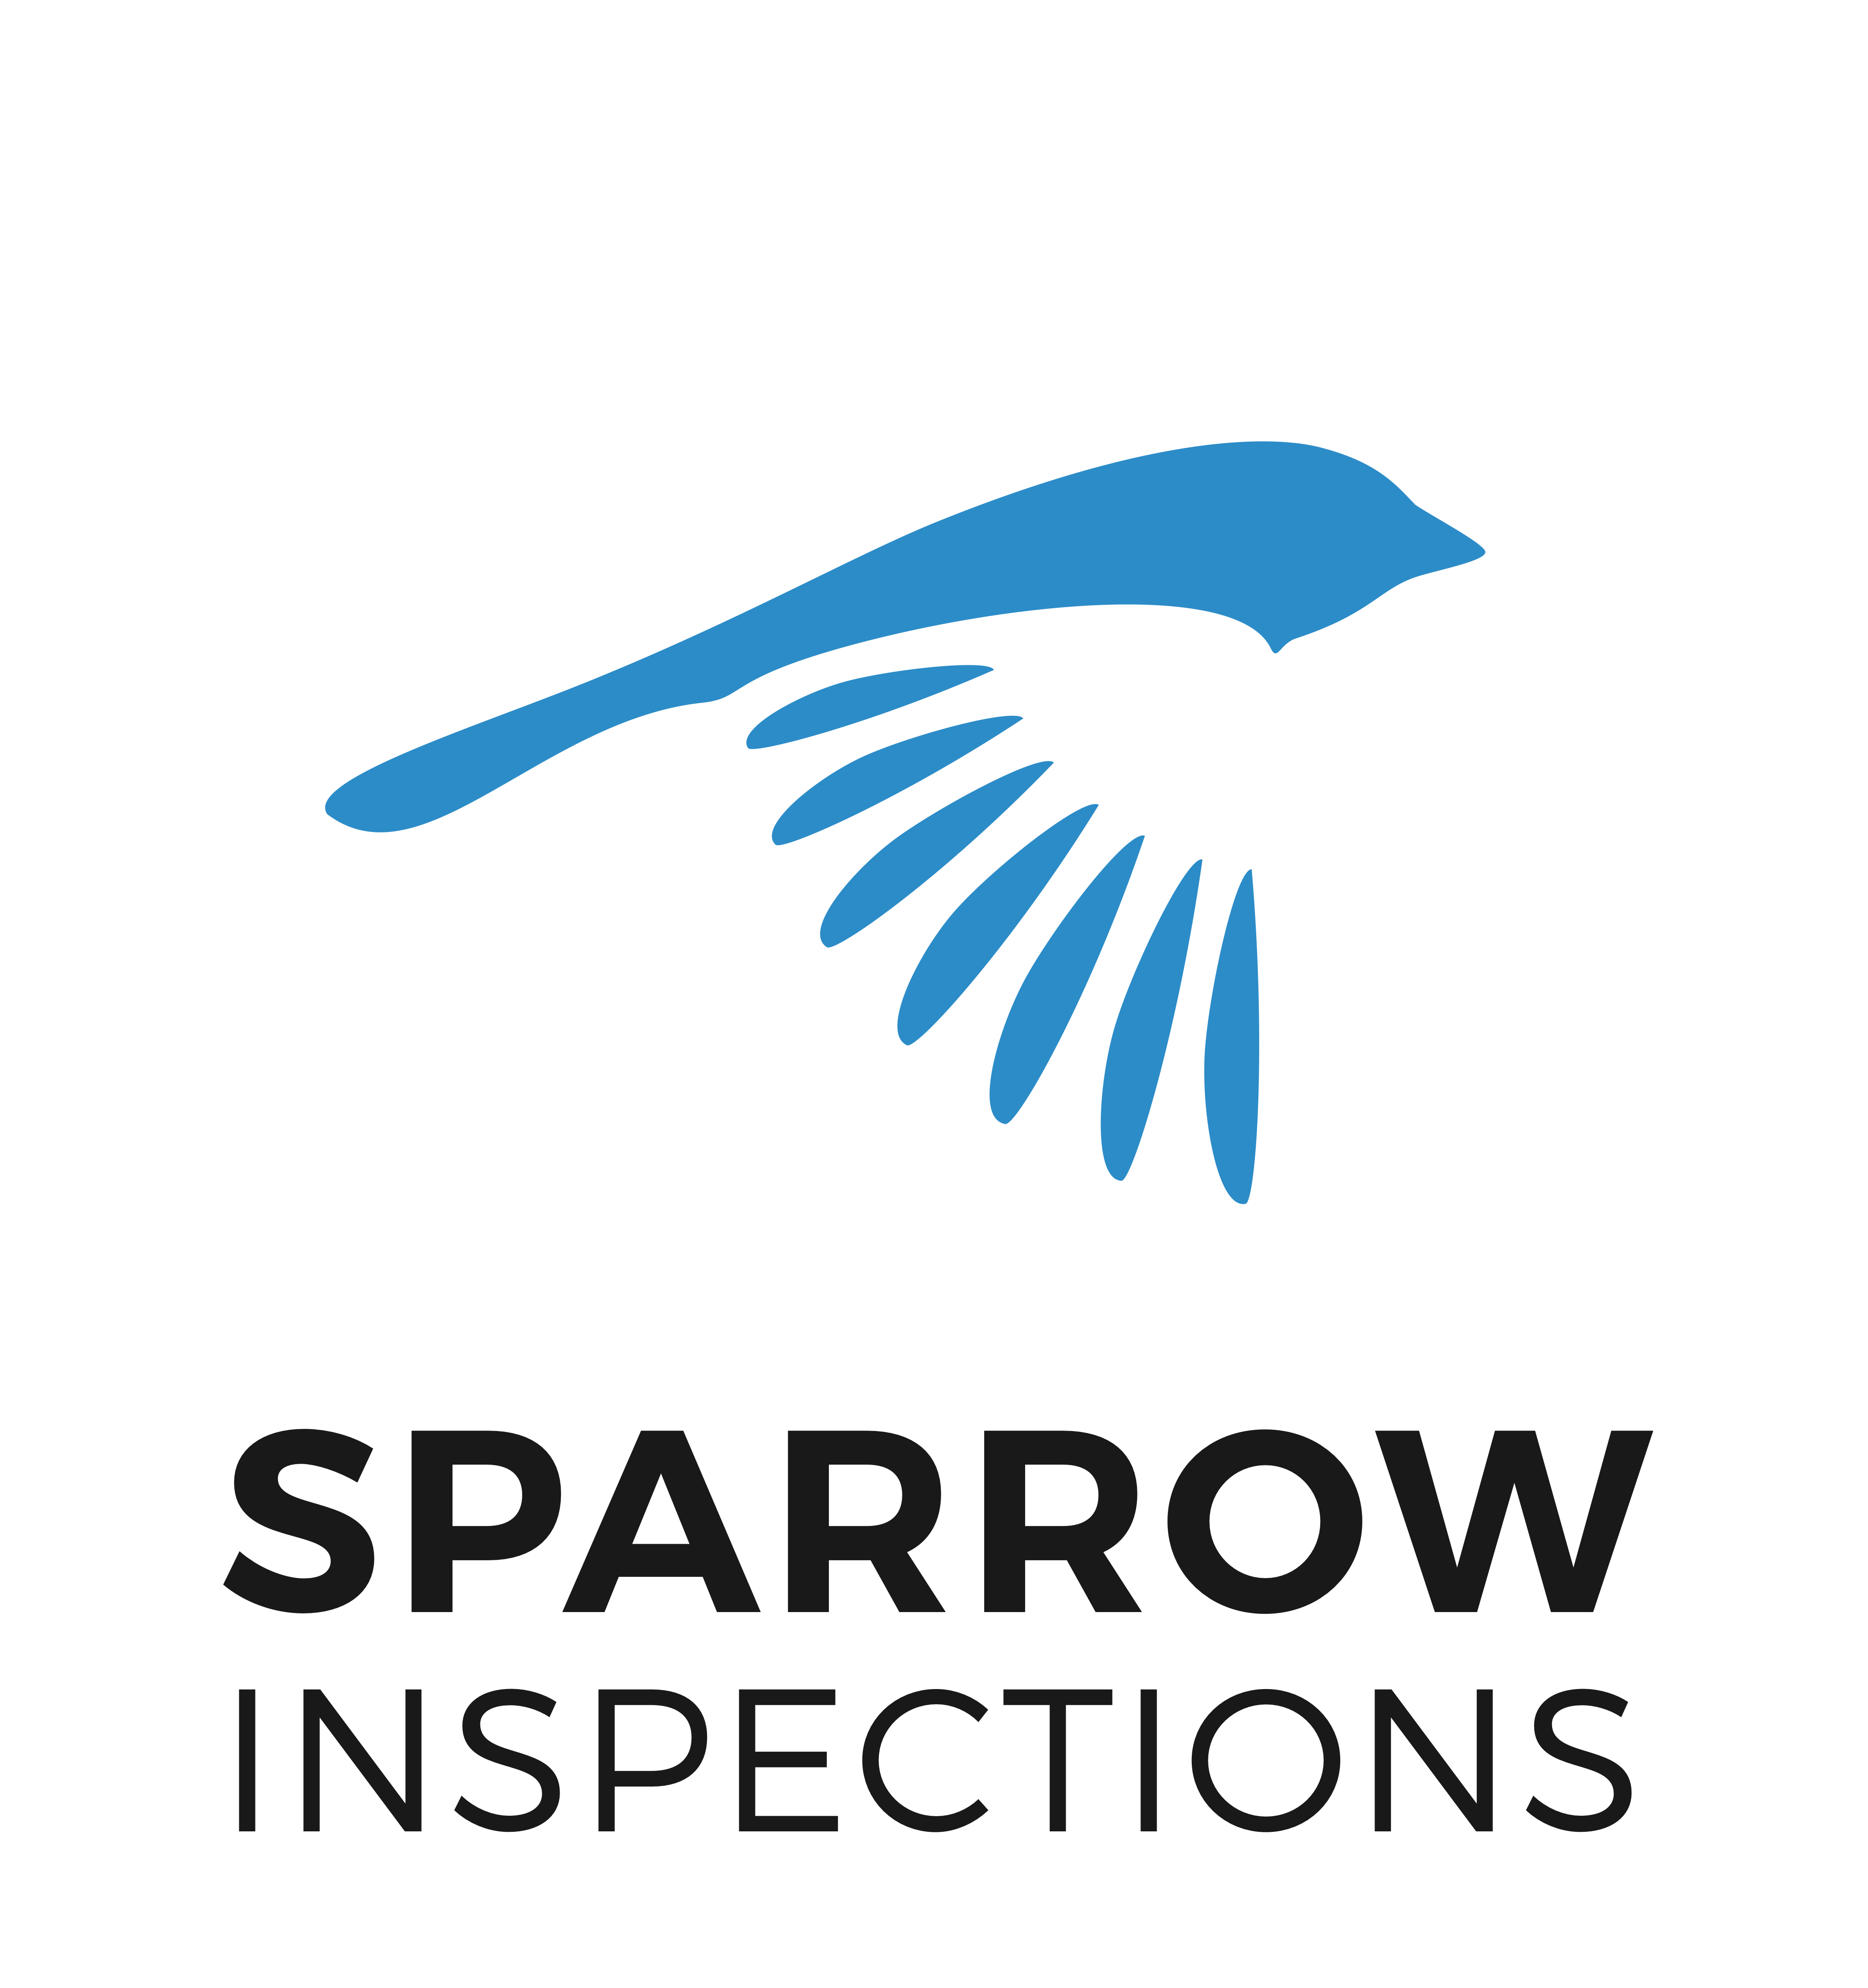 Sparrow Inspections